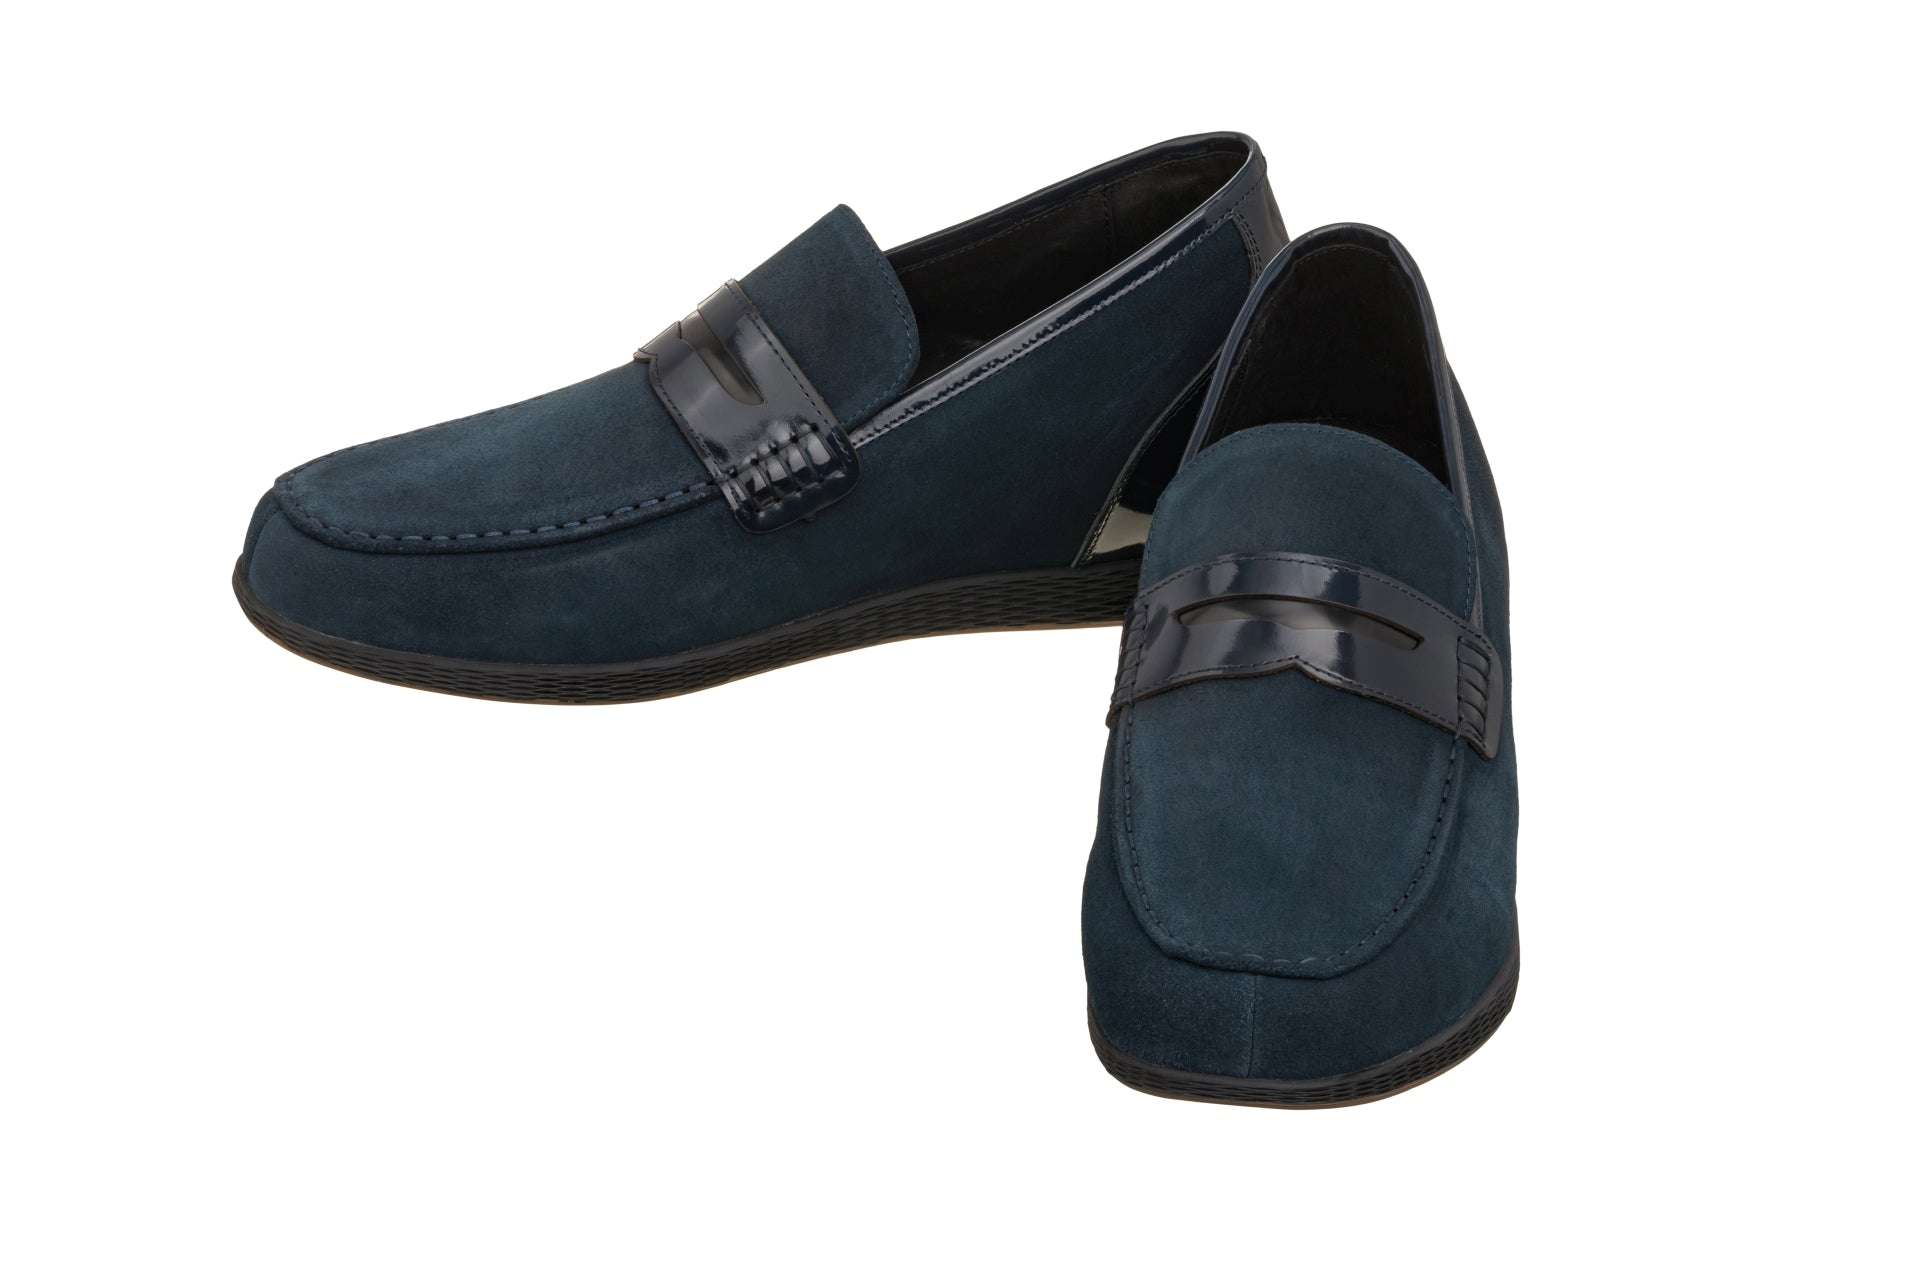 Elevator shoes height increase TOTO - K1094 - 2.6 Inches Blue Lightweight Penny Loafers